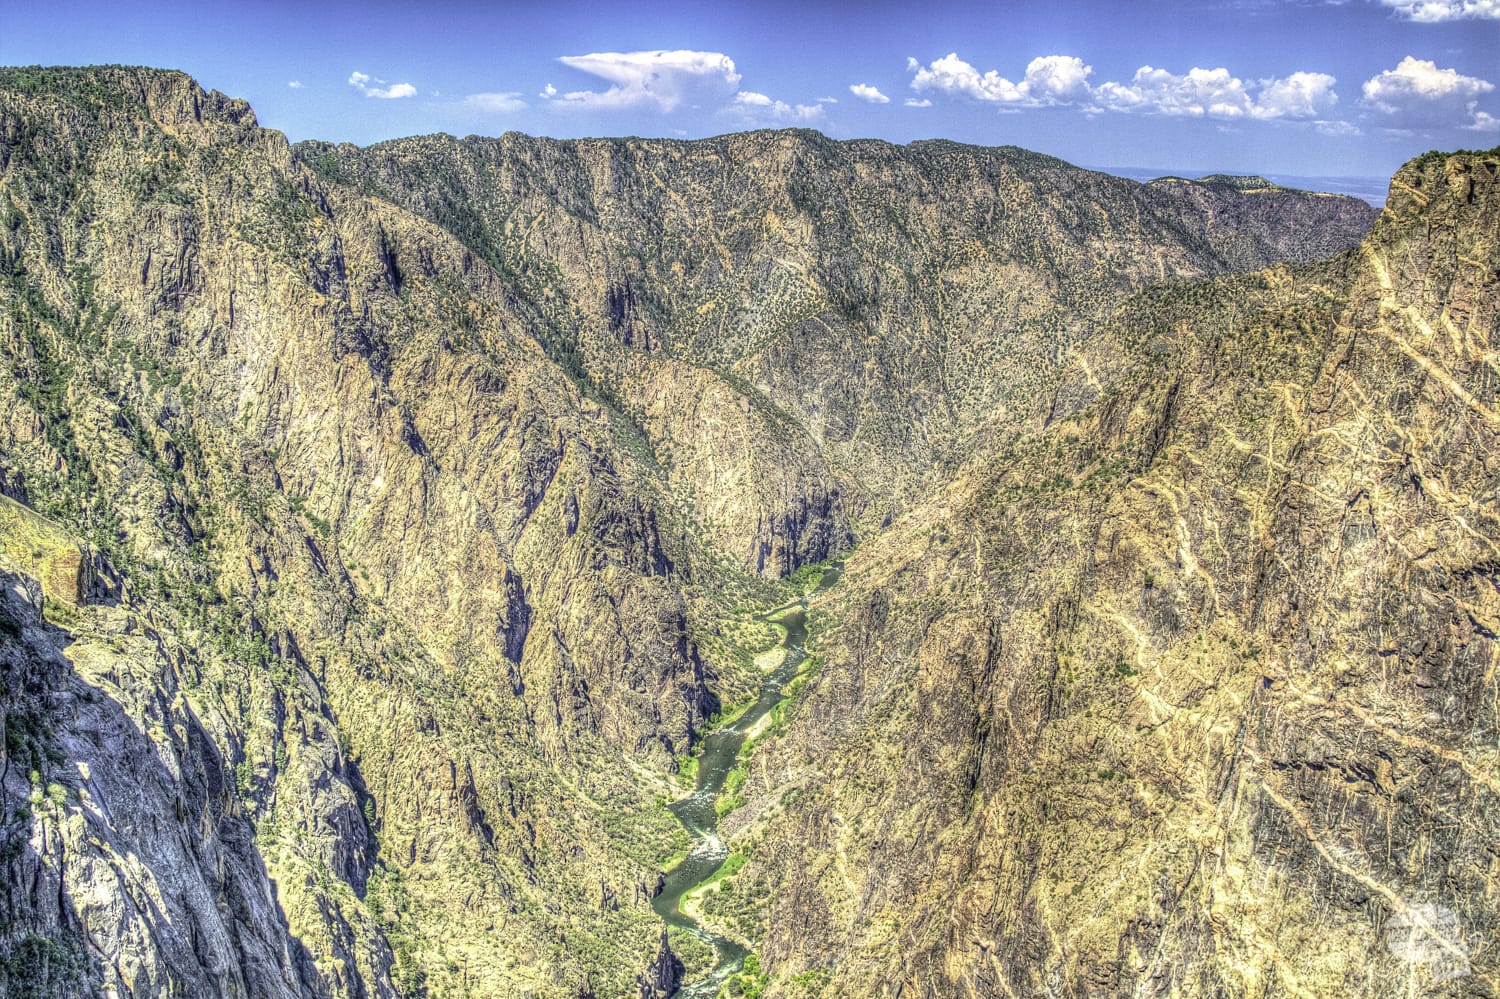 Western edge of the Black Canyon.